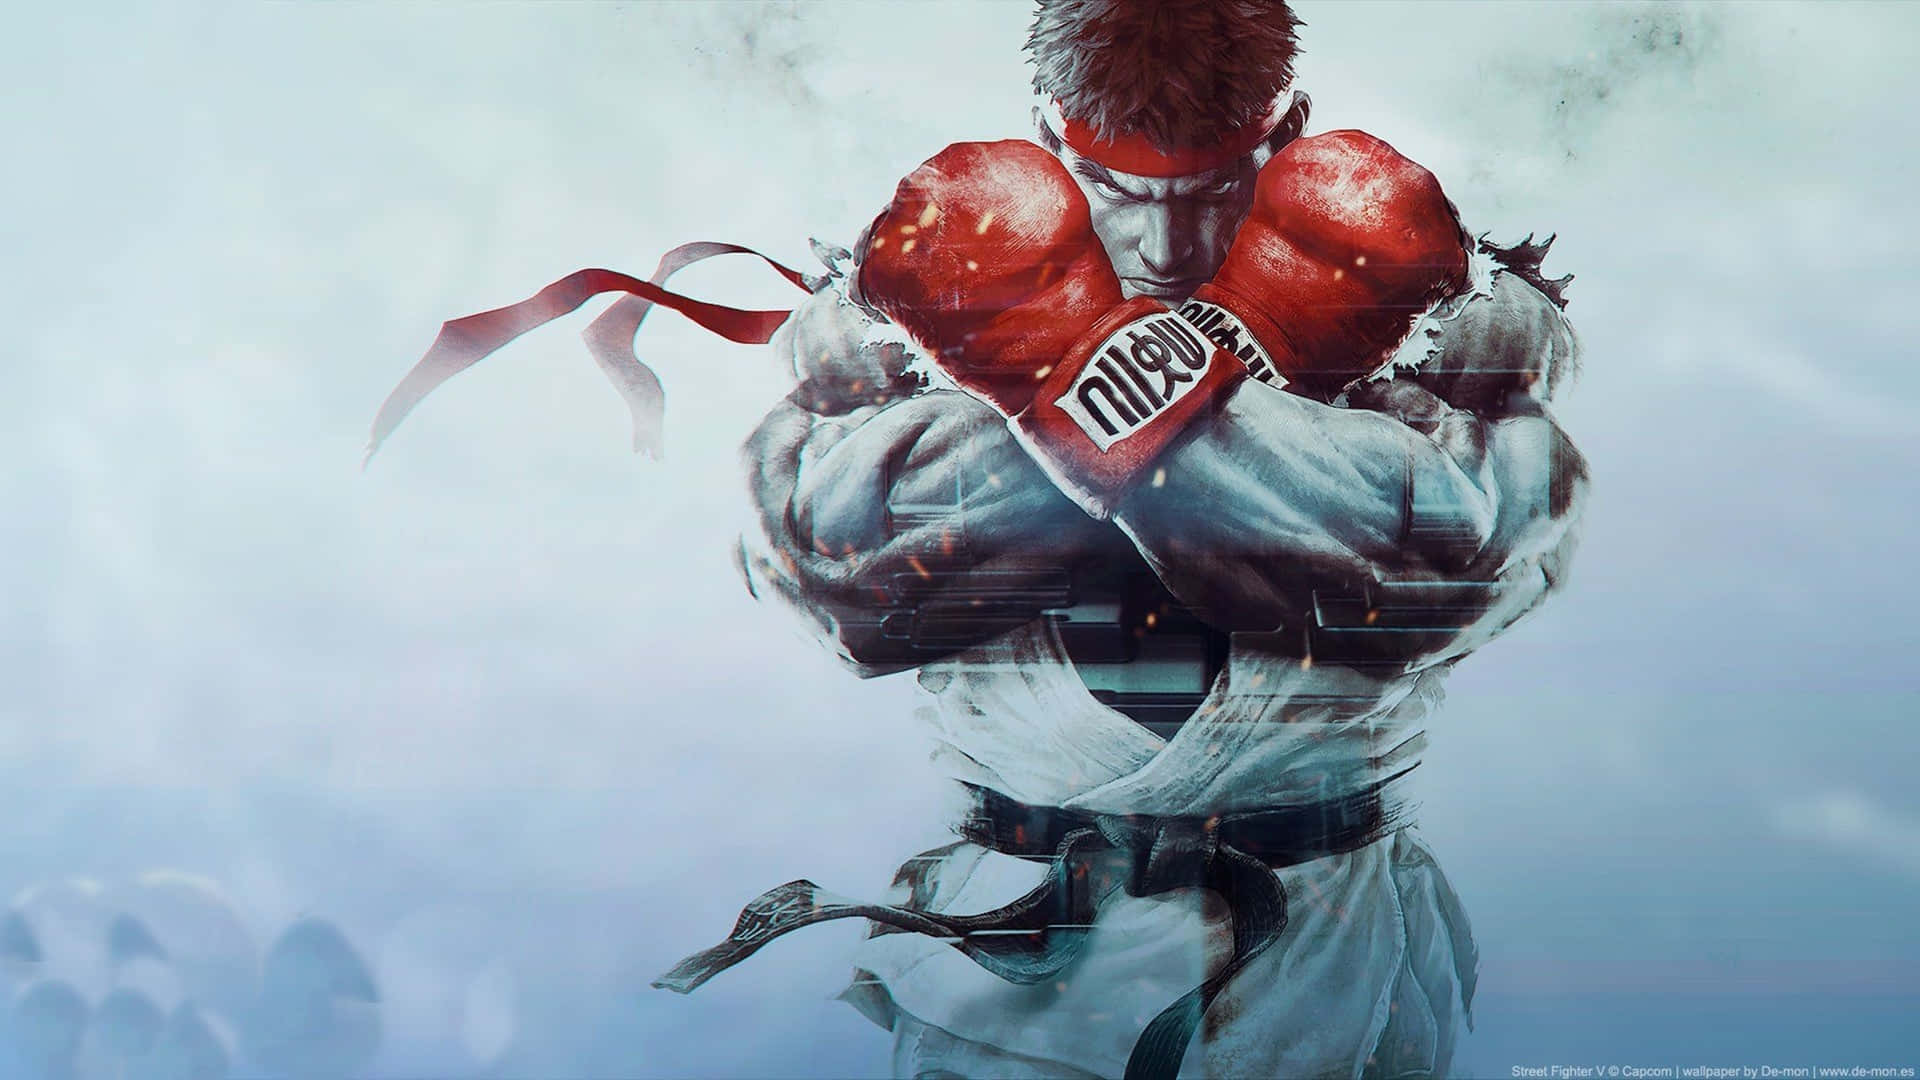 "Stun your opponents with your Street Fighter 4k skills!" Wallpaper